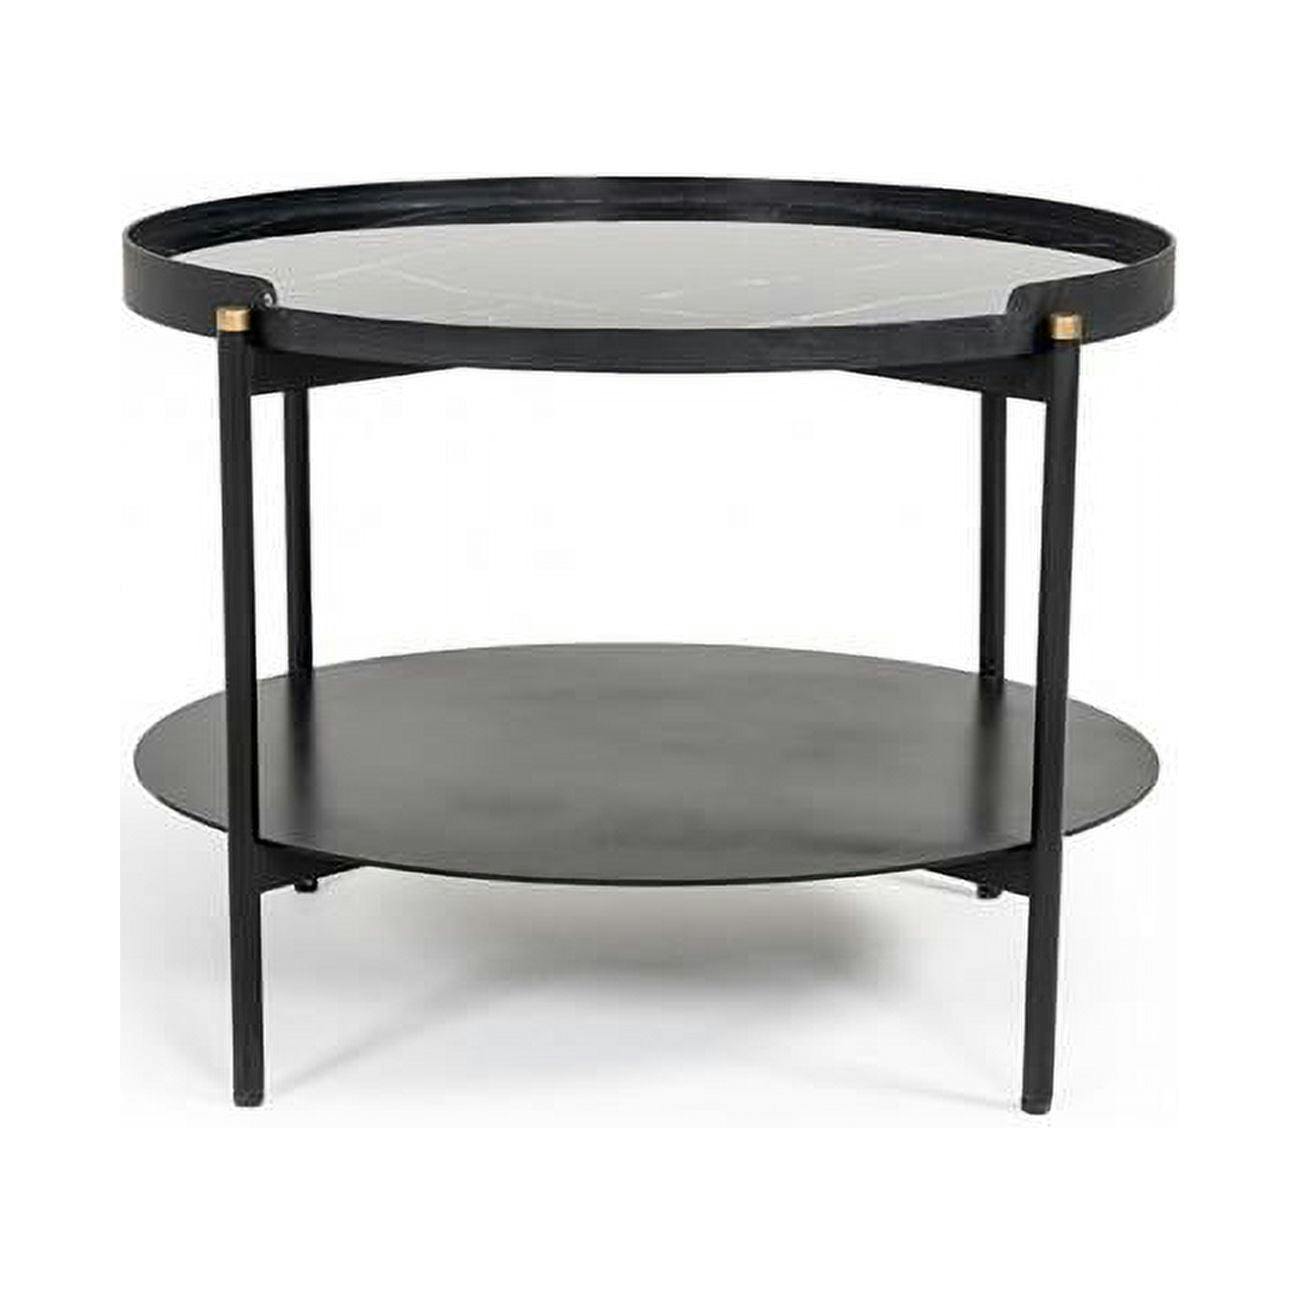 Luxurious Black Marble Round Coffee Table with Gold Accents